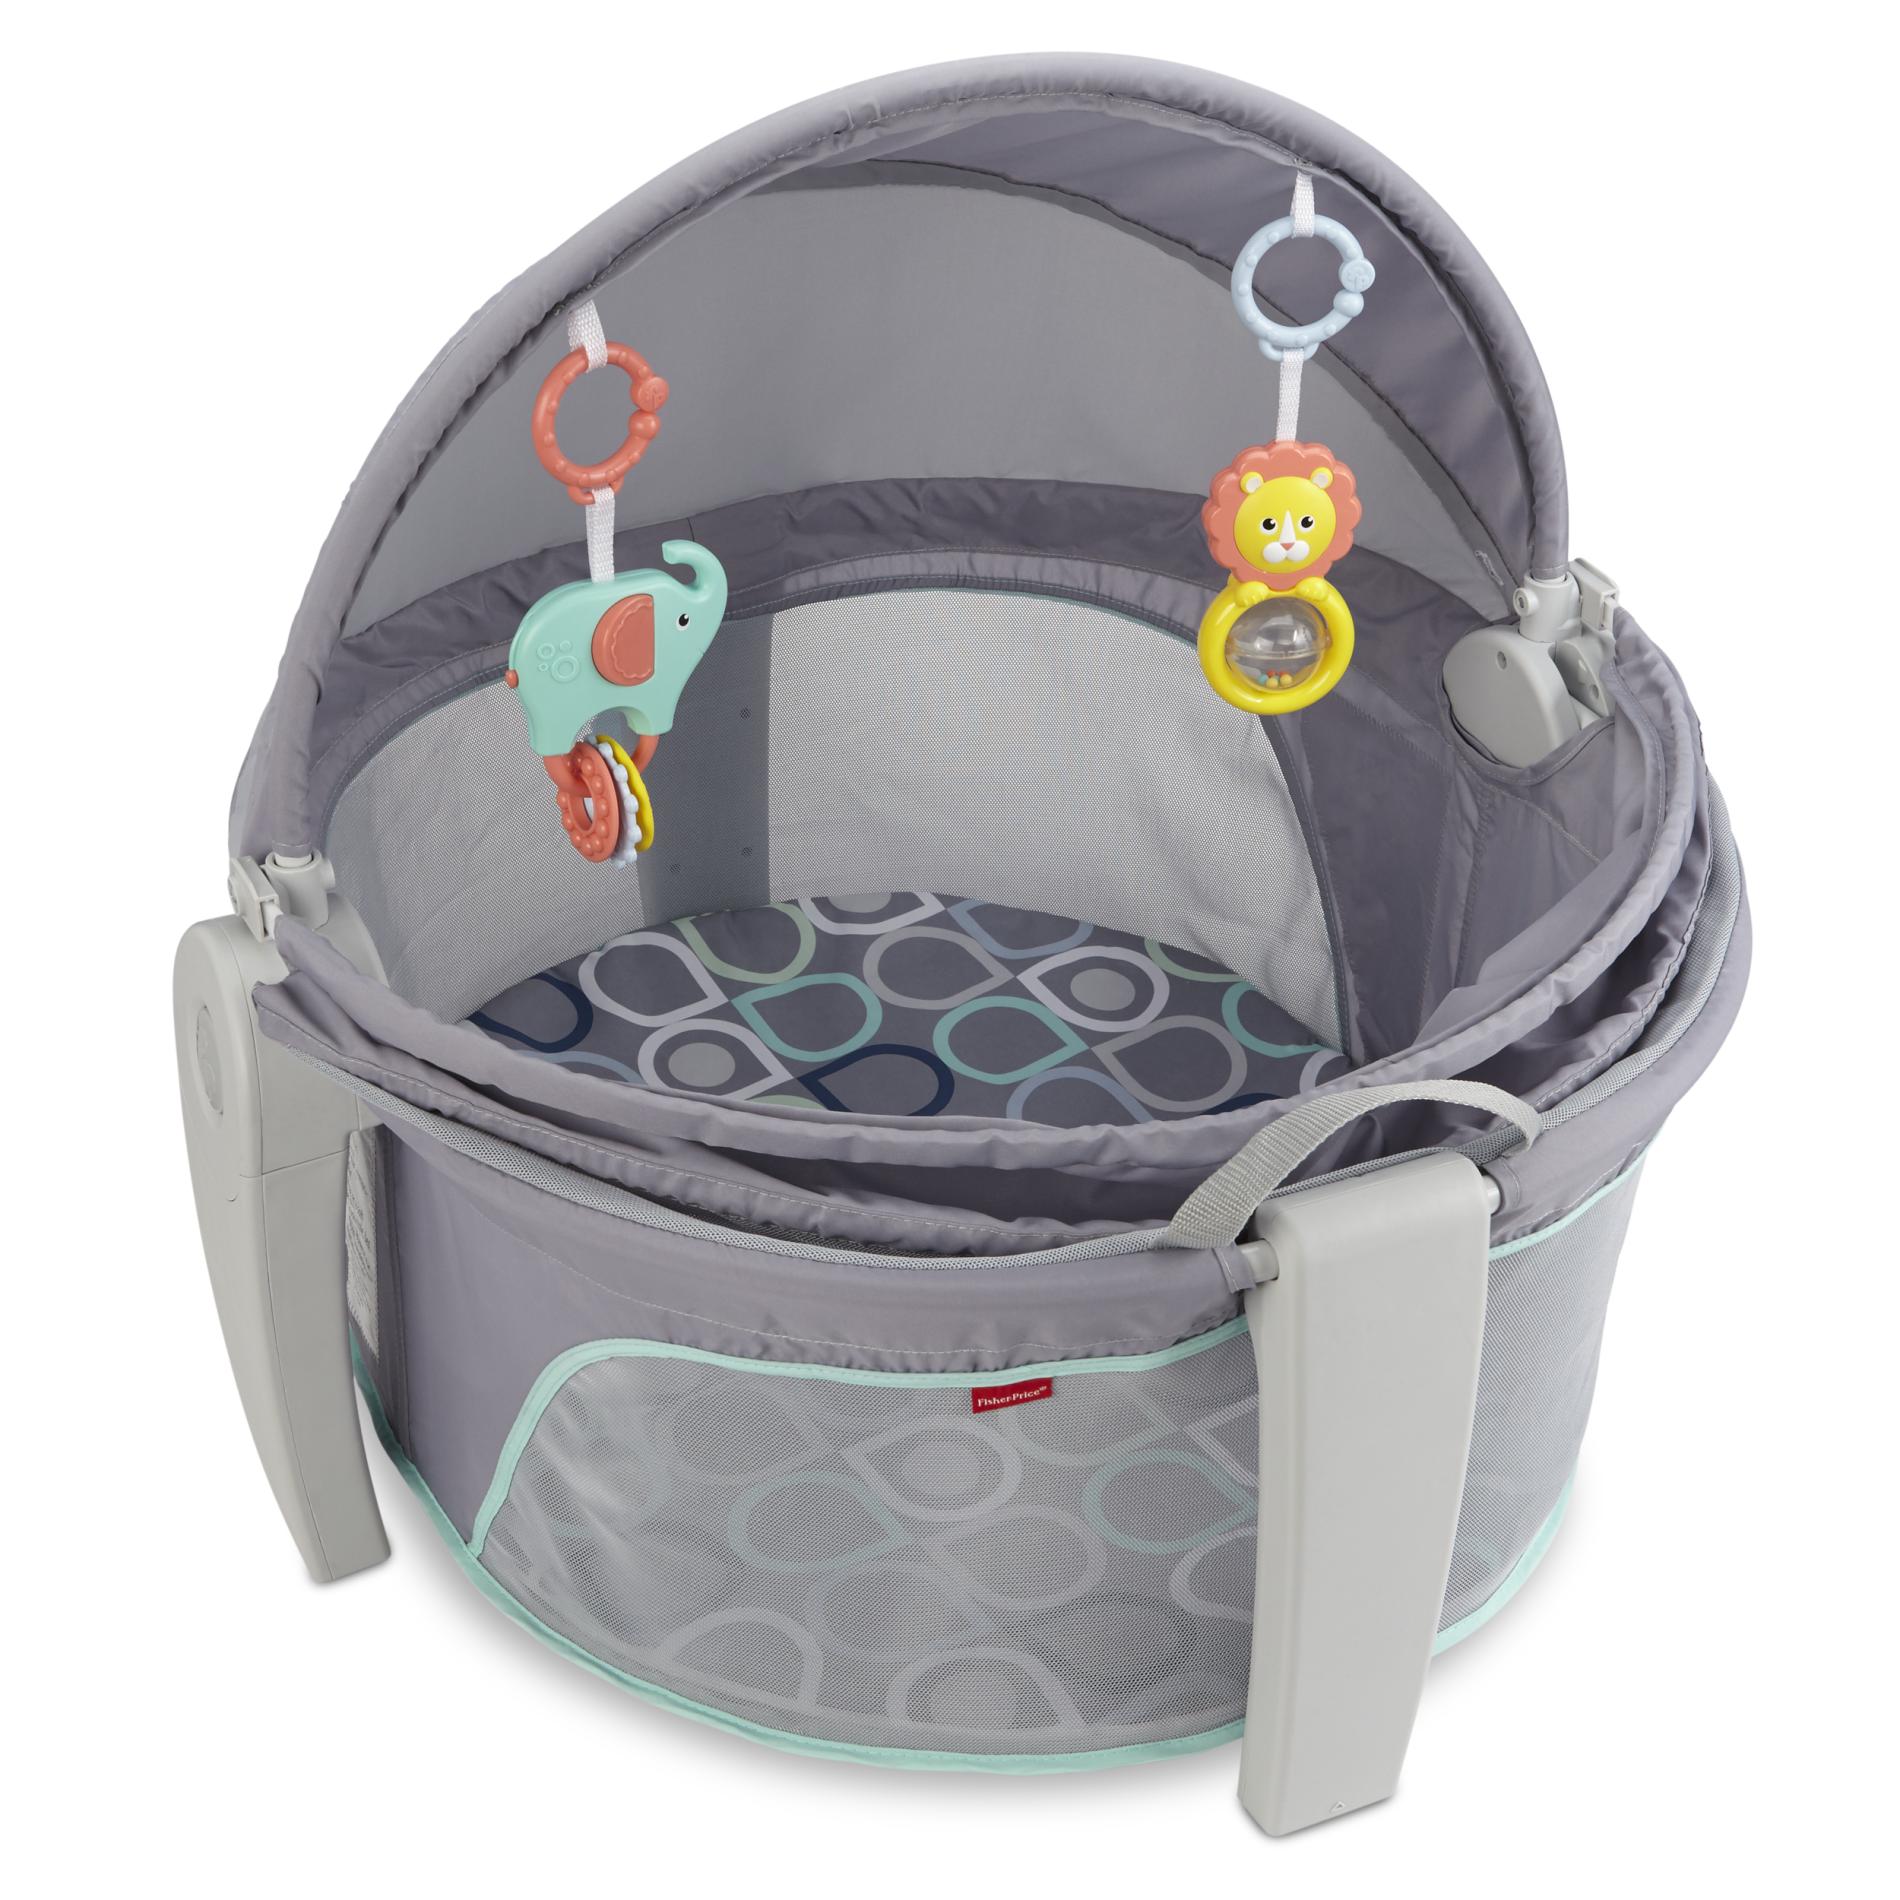 FisherPrice Infants' OntheGo Baby Dome Shop Your Way